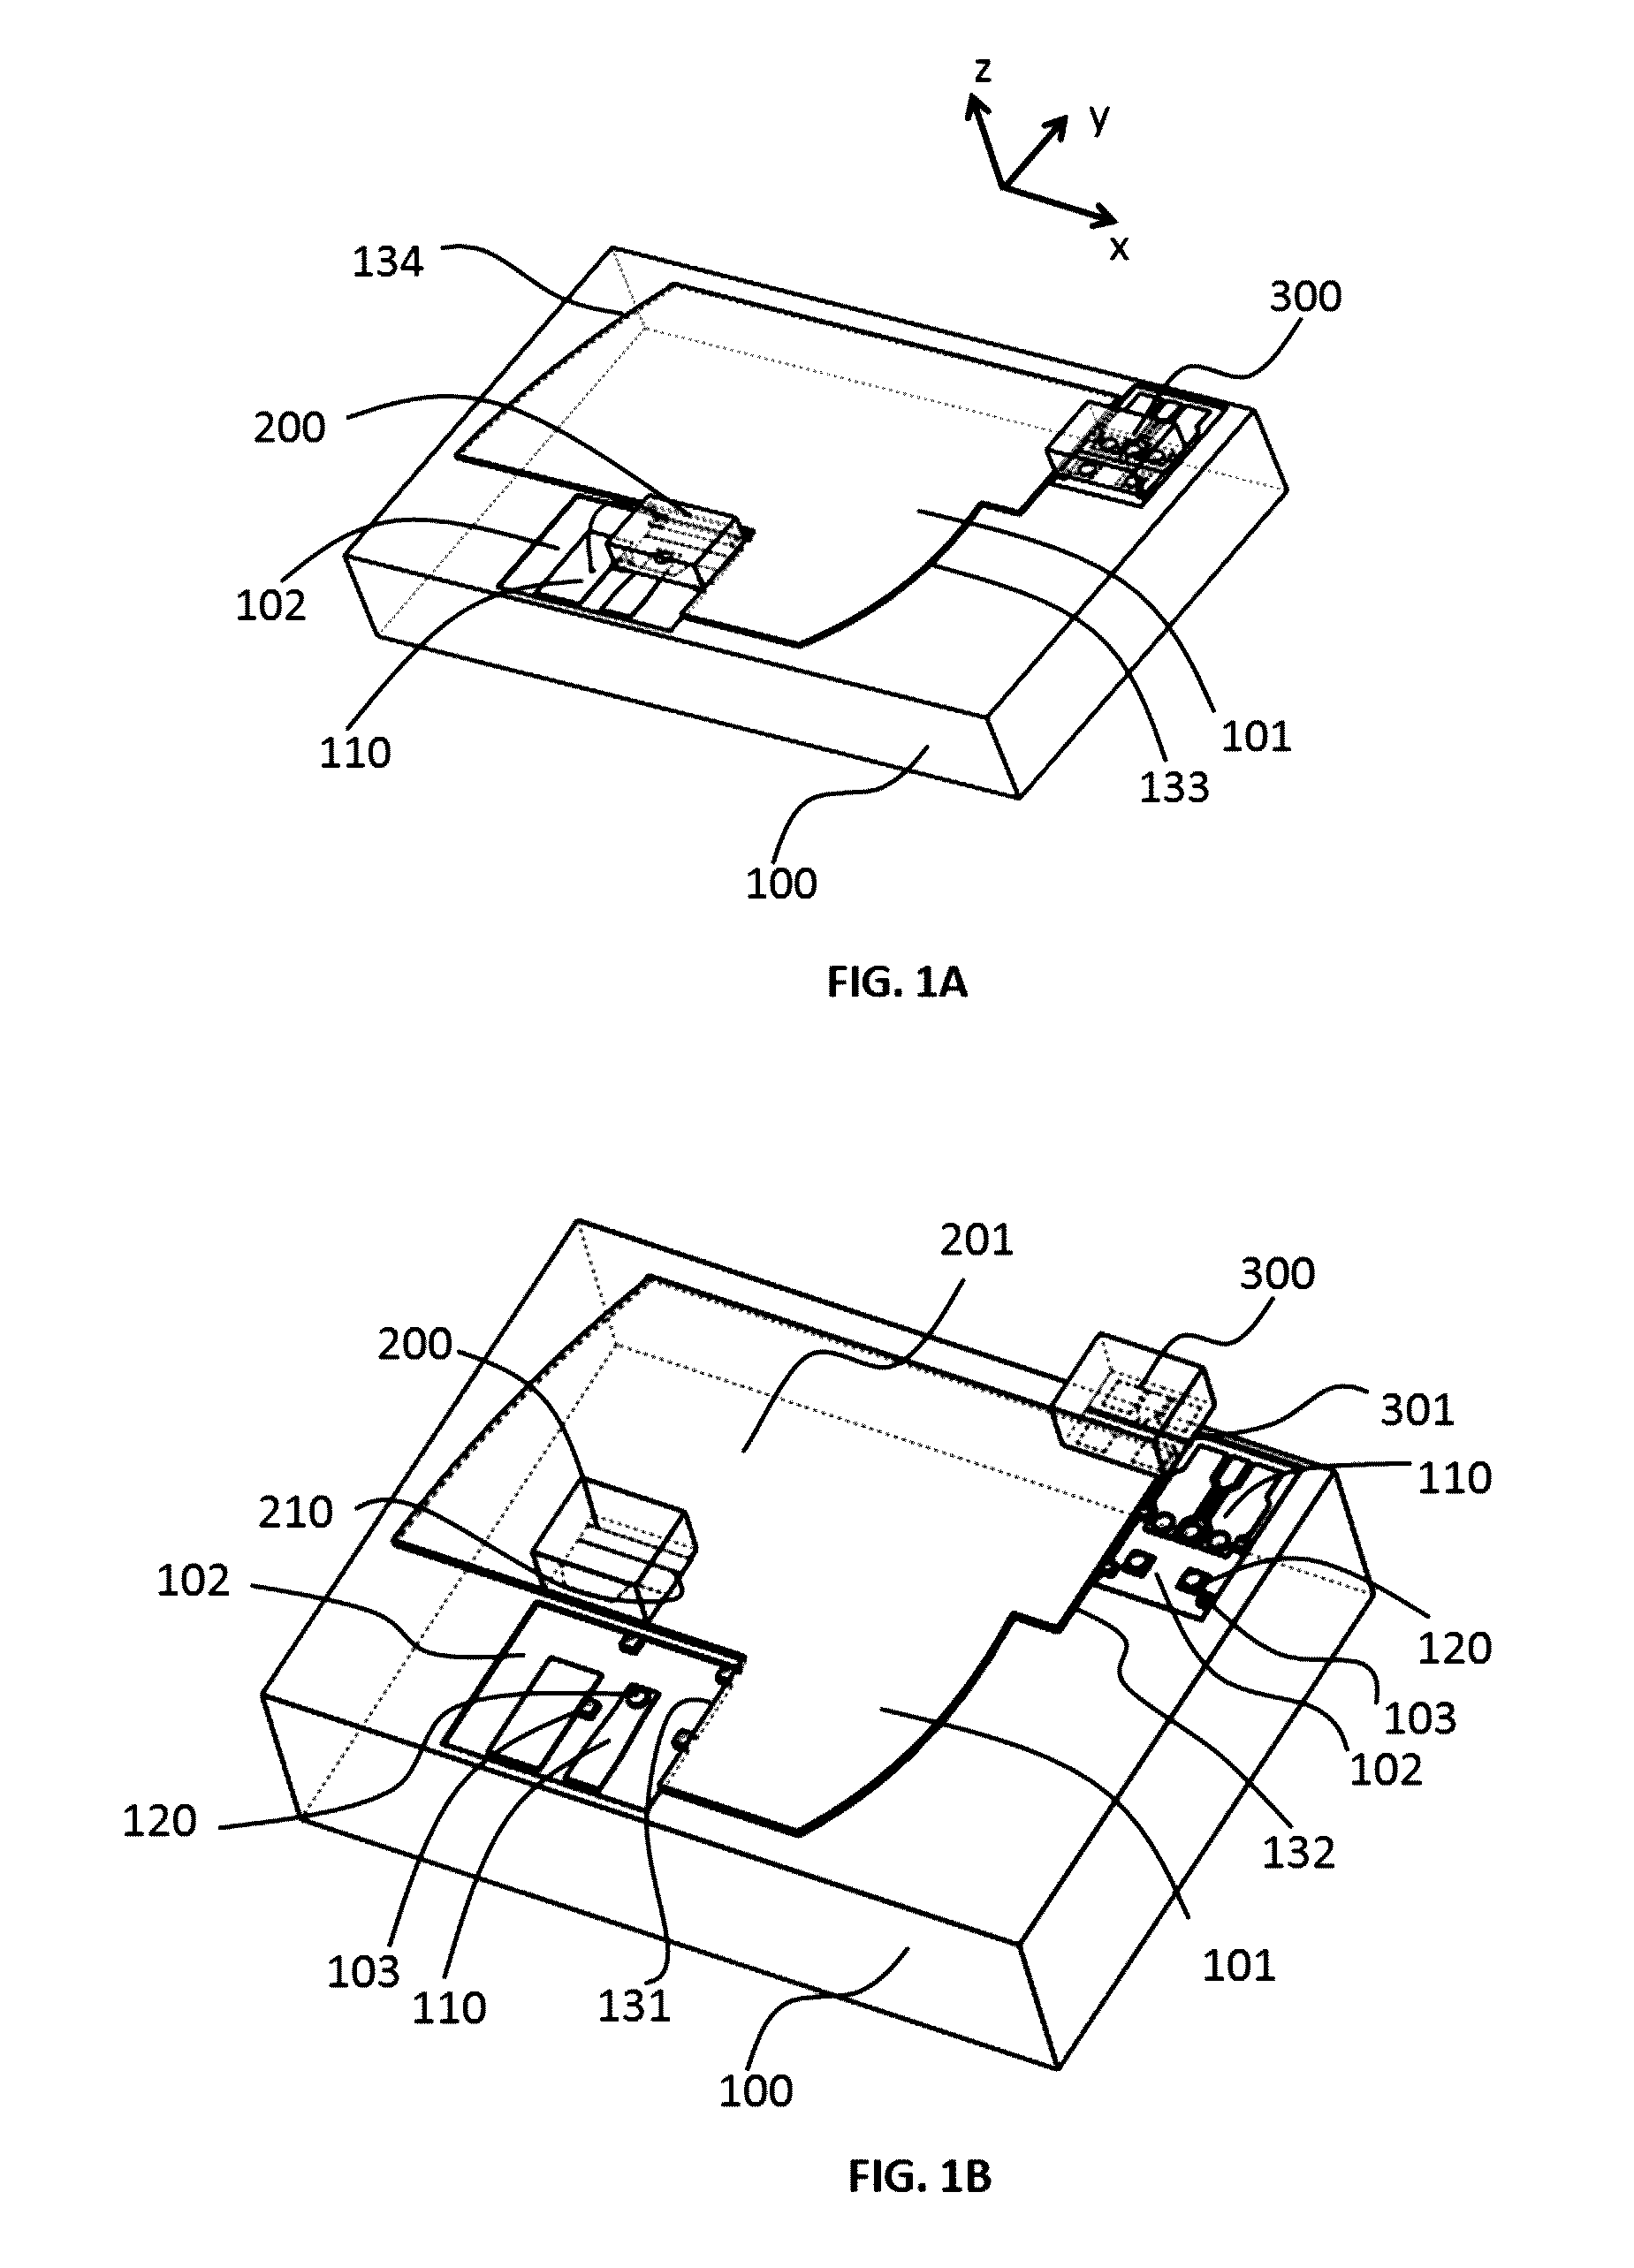 Hybrid integrated optical device enabling high tolerance optical chip bonding and the method to make the same